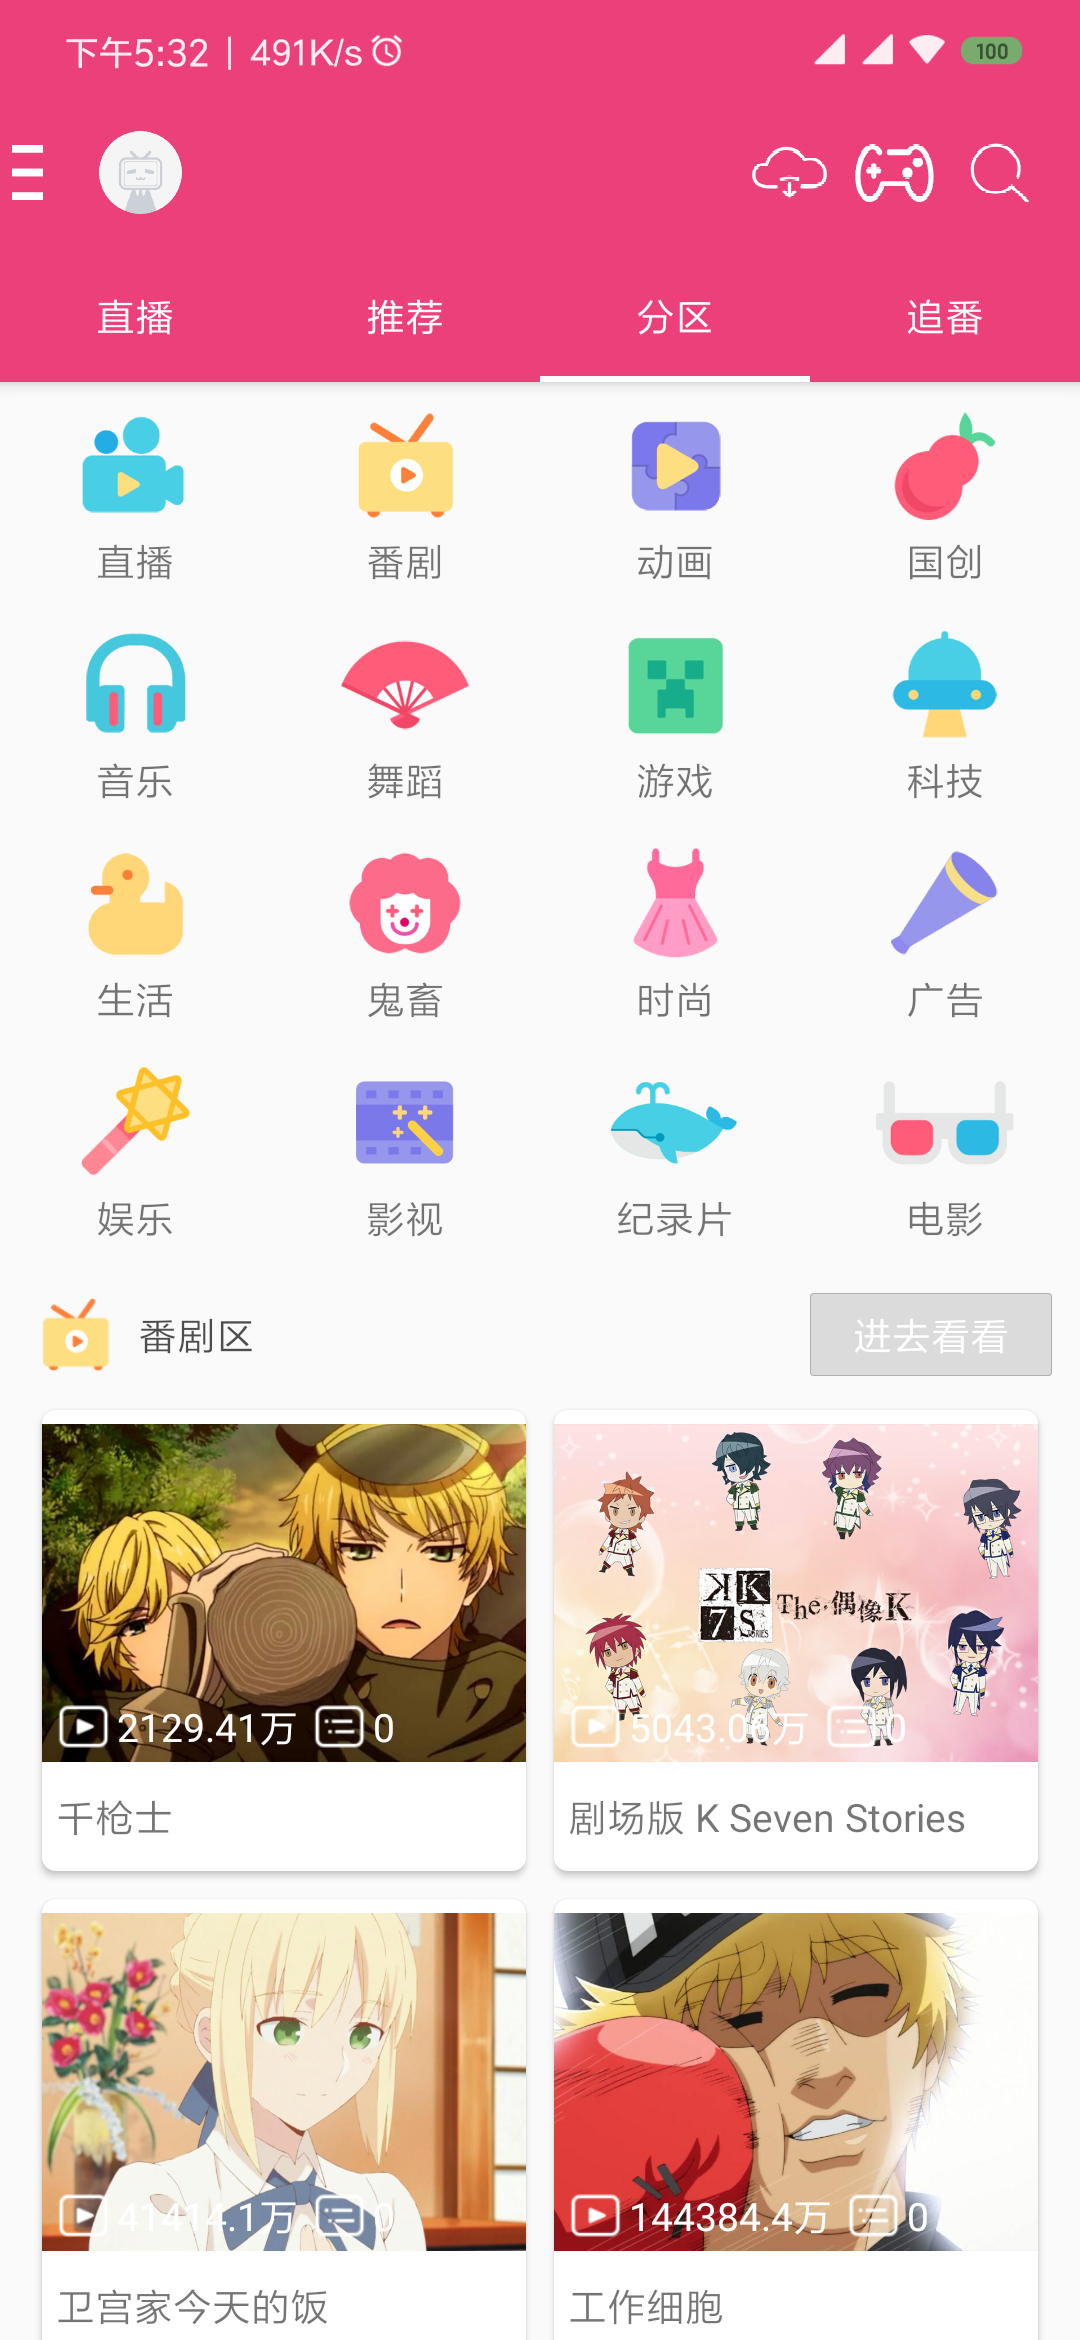 Top 4 Ways to Download Bilibili Videos on Your Device: Know in Detail